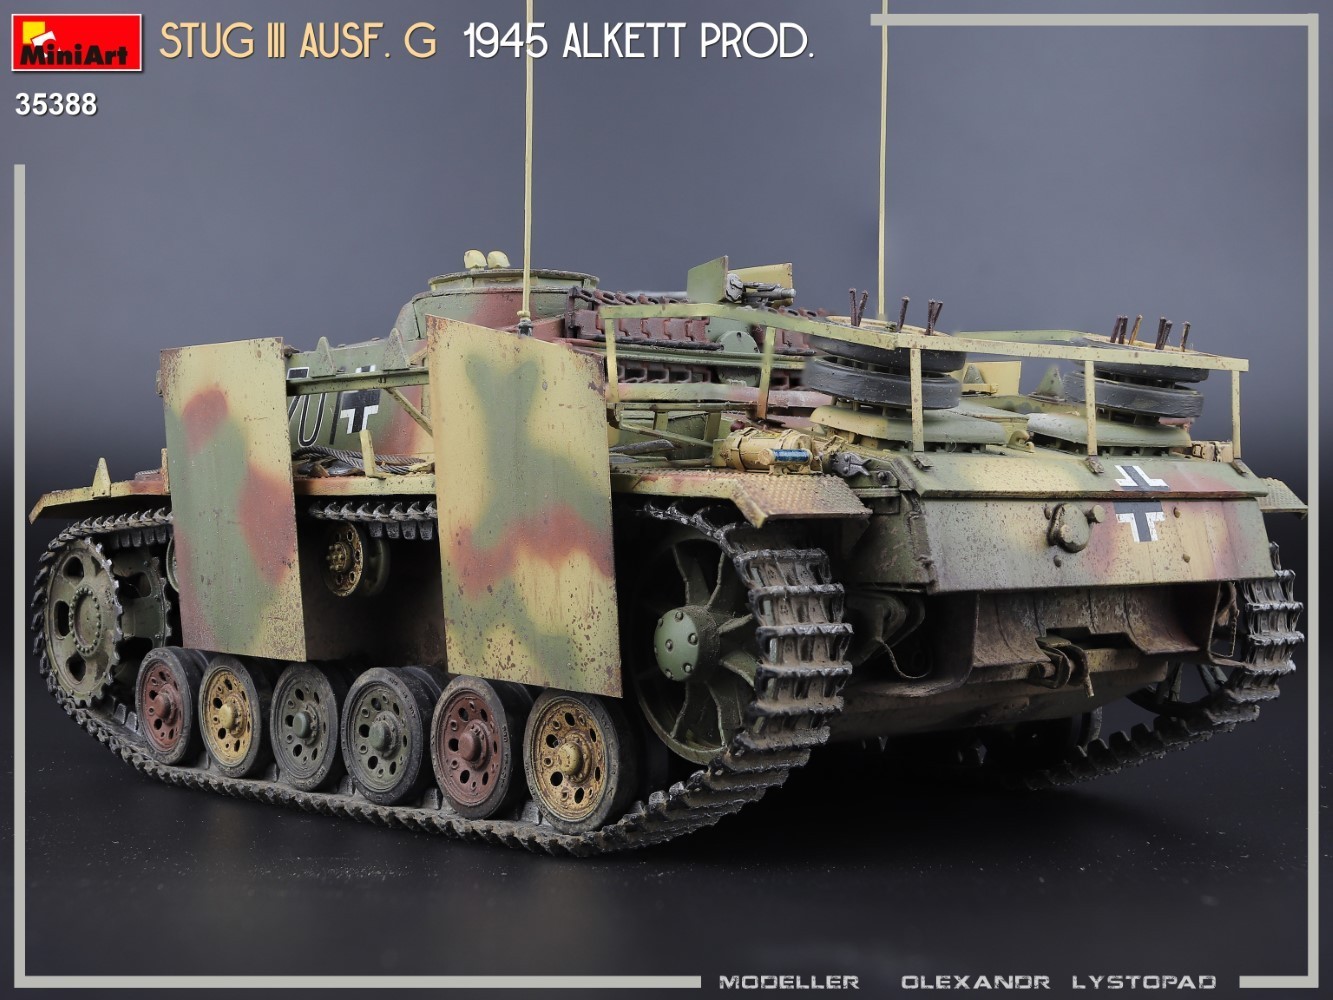 MiniArt to Release Highly Detailed 1/35 StuG III Ausf. G 1945 Alkett Prod. Model Kit Painting and Marking-13